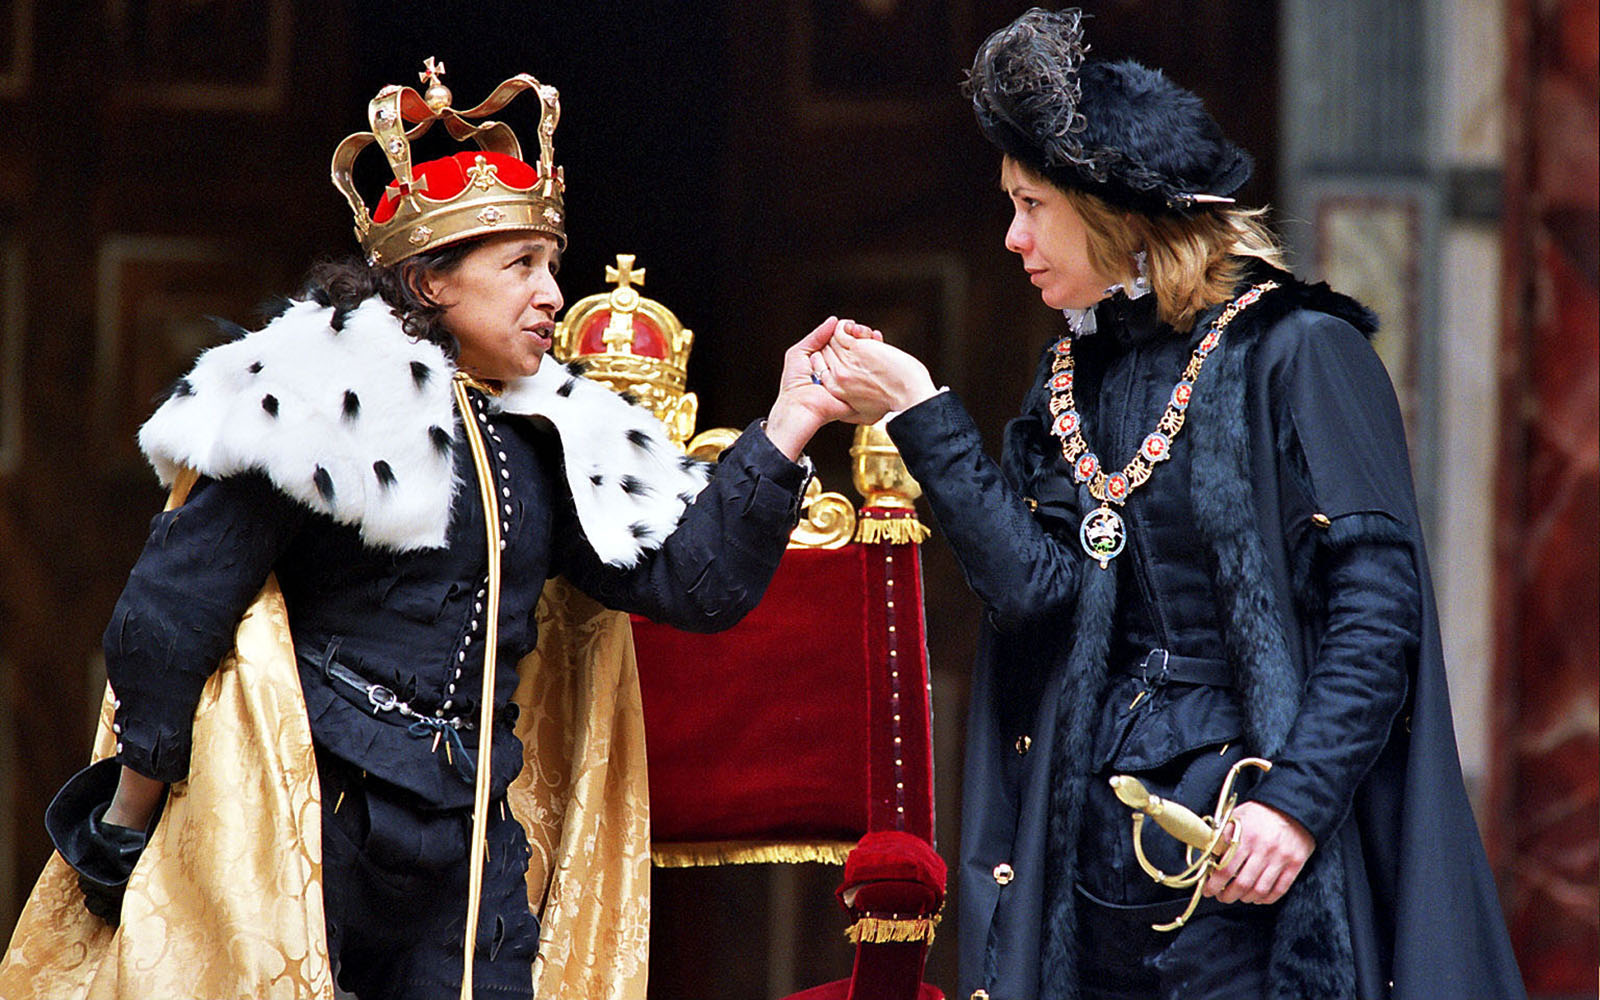 An actor with a red crown and wearing a golden ermine cloak reaches to kiss the hand of another woman wearing black traditional Elizabethan dress.